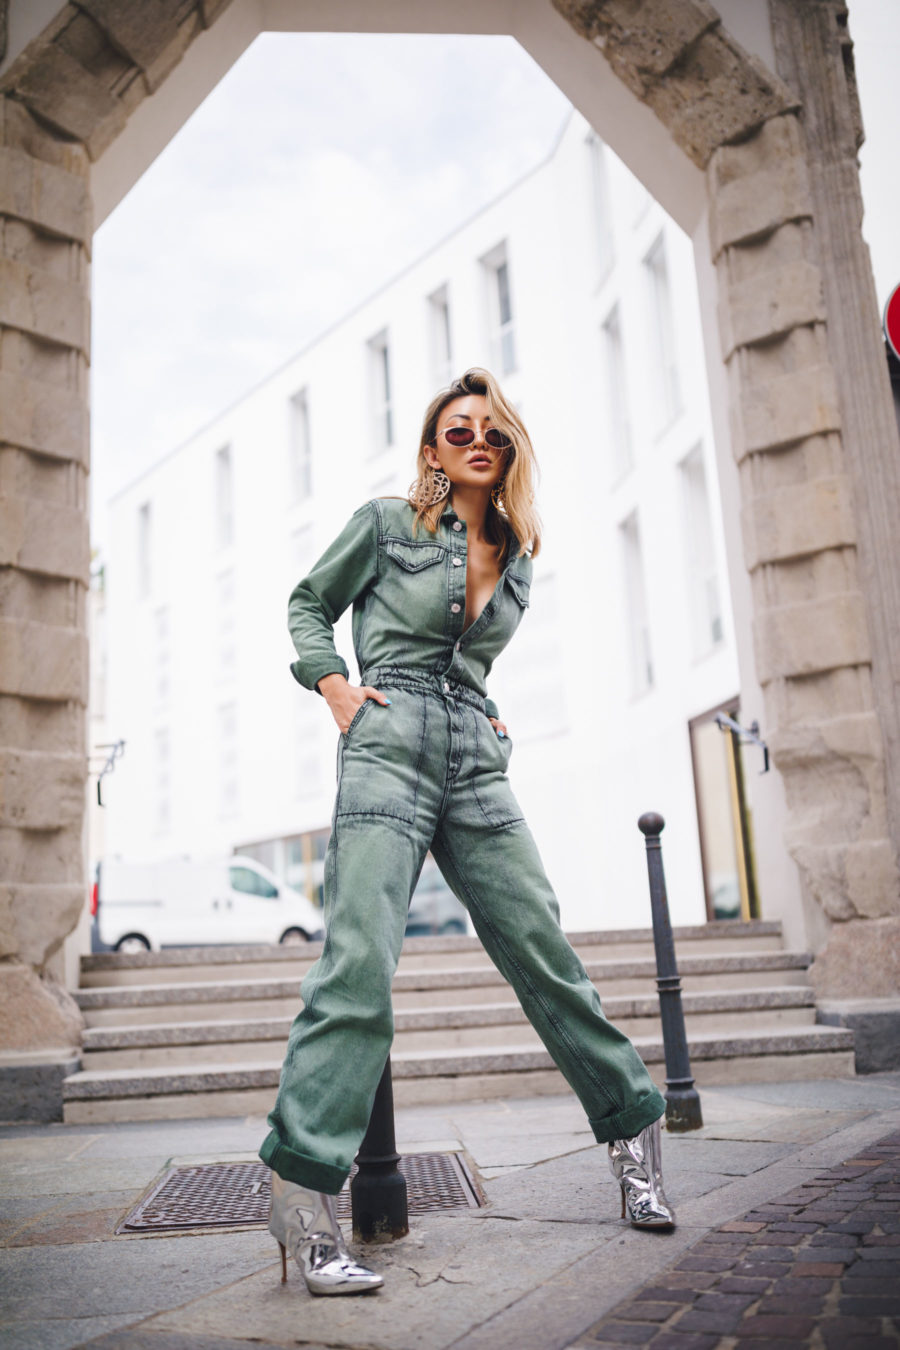 fashion blogger jessica wang shares ugly fashion trends of 2020 wearing denim boilersuit and silver booties // Notjessfashion.com